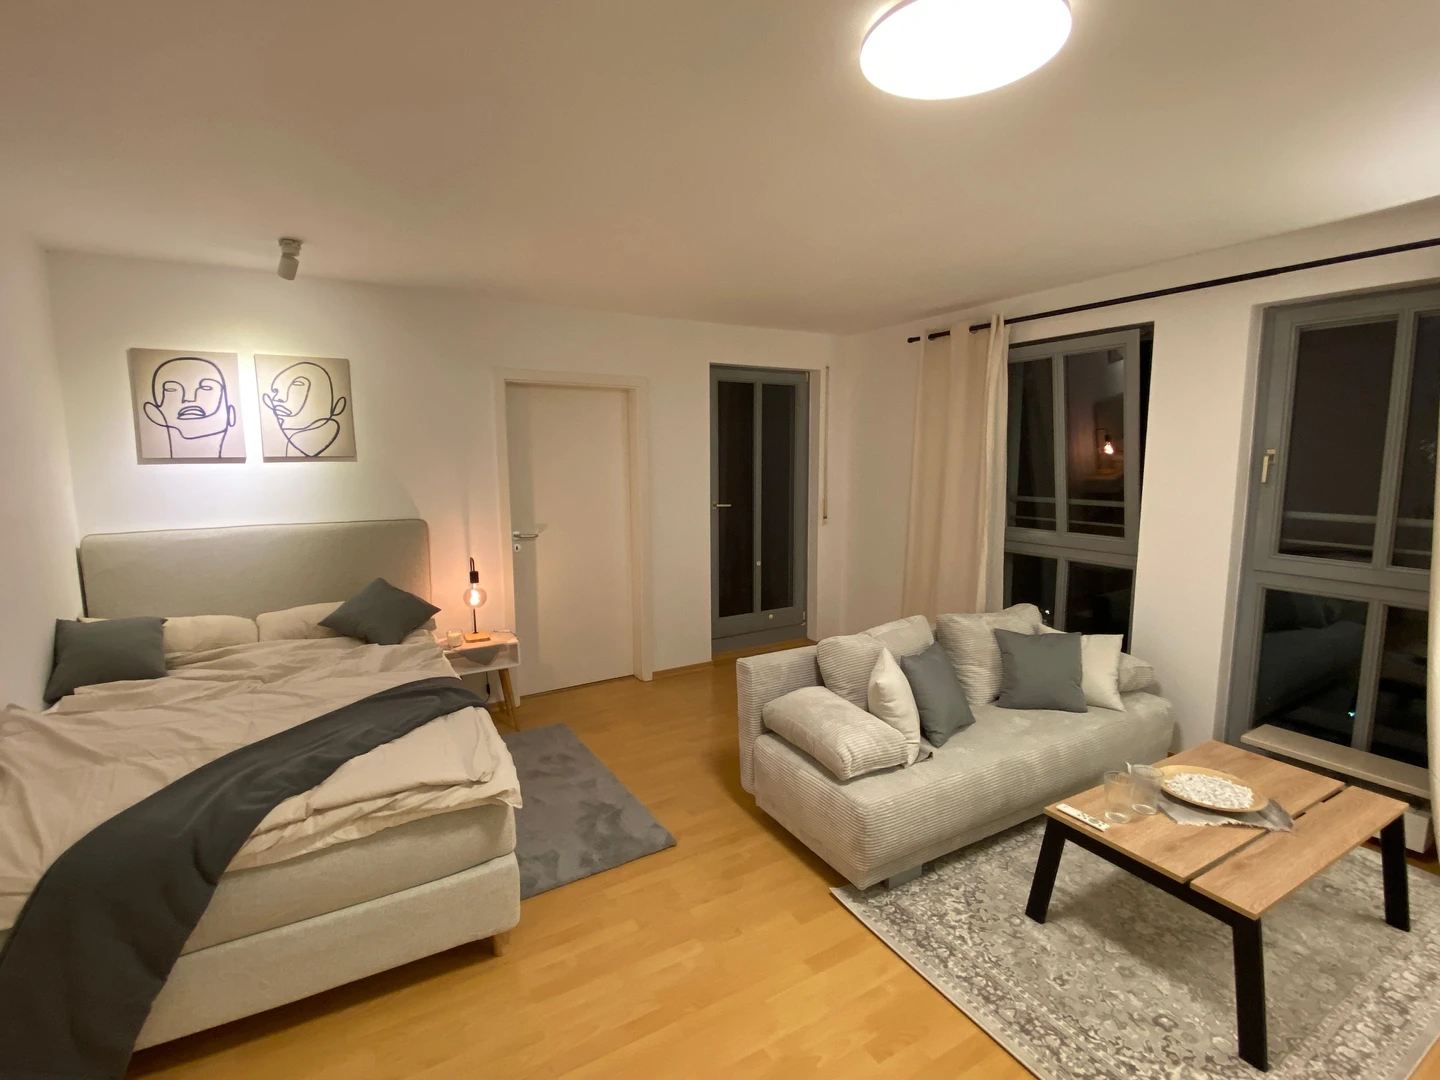 Room for rent in a shared flat in Leipzig